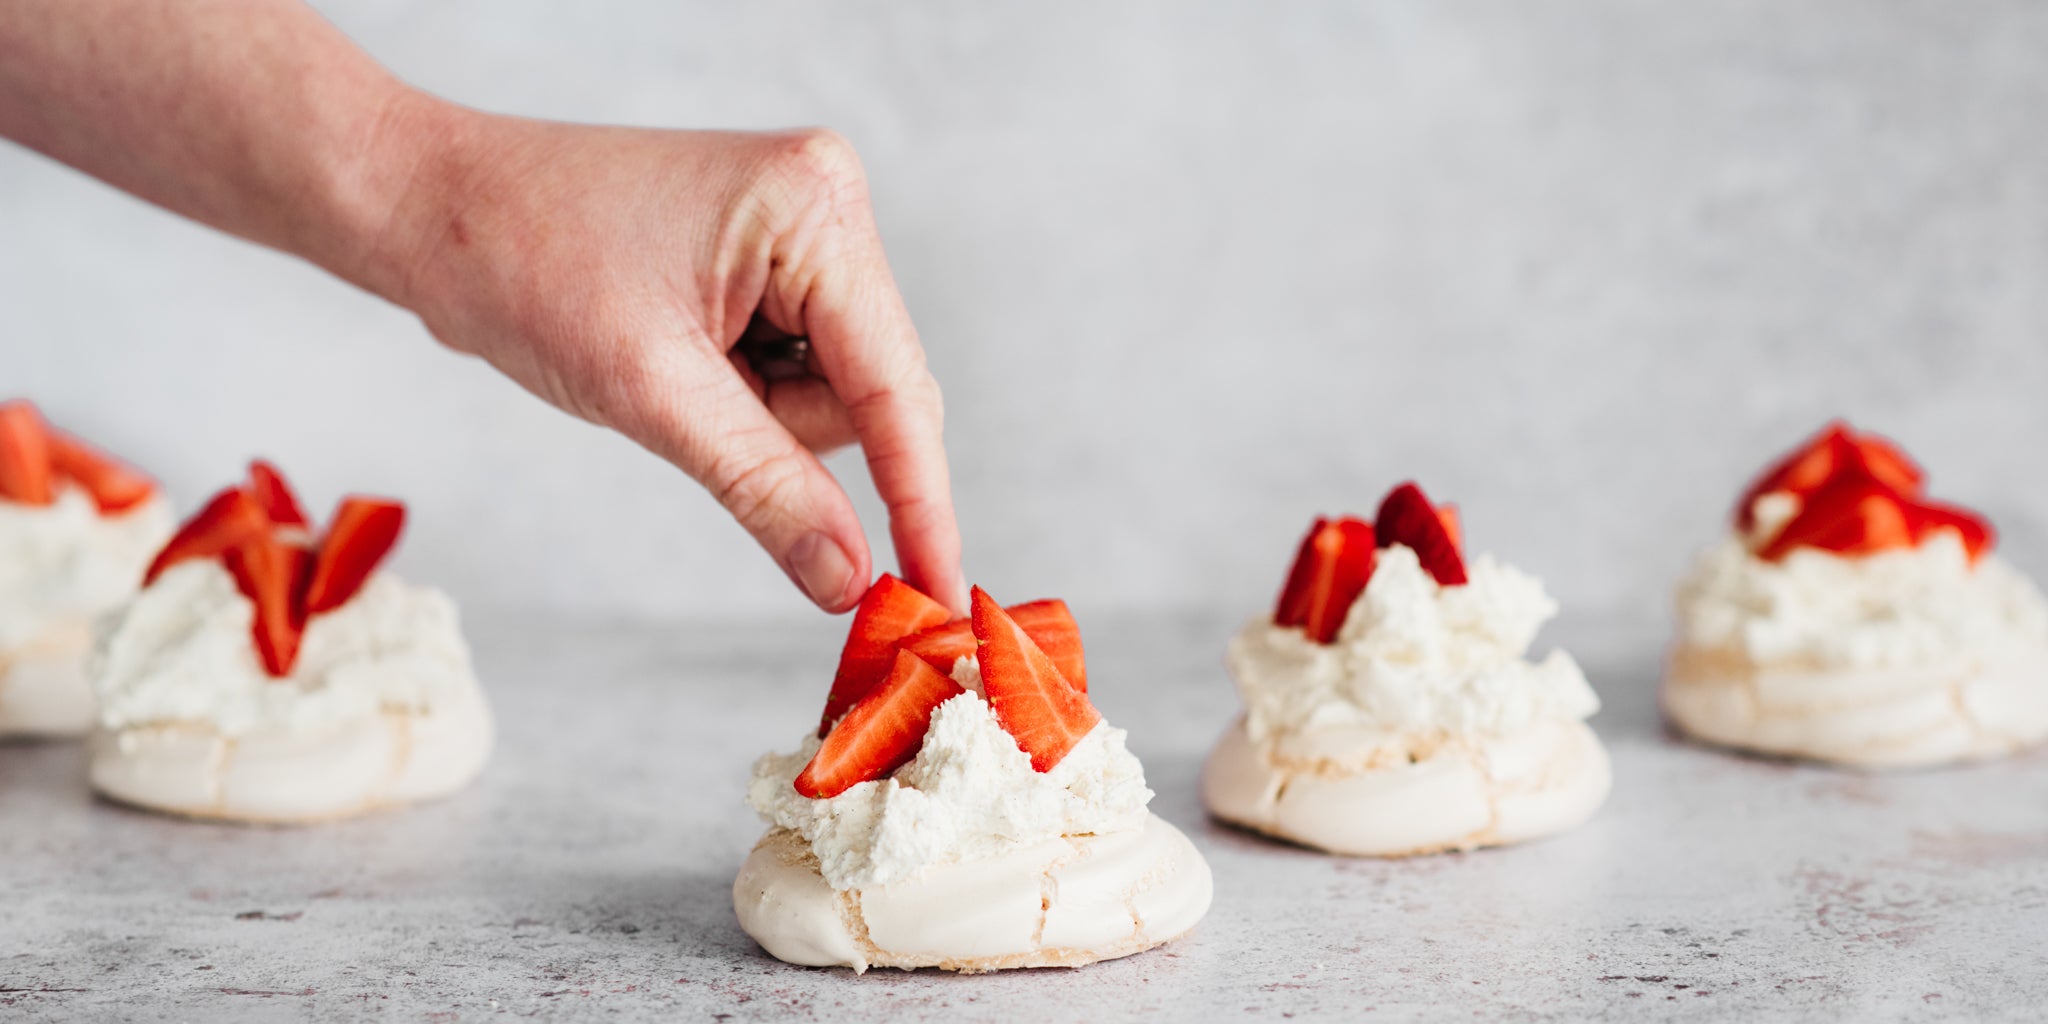 5 meringue nests topped with cream and strawberries in a line, with a hand reaching in adding a strawberry to the top of the centre meringue